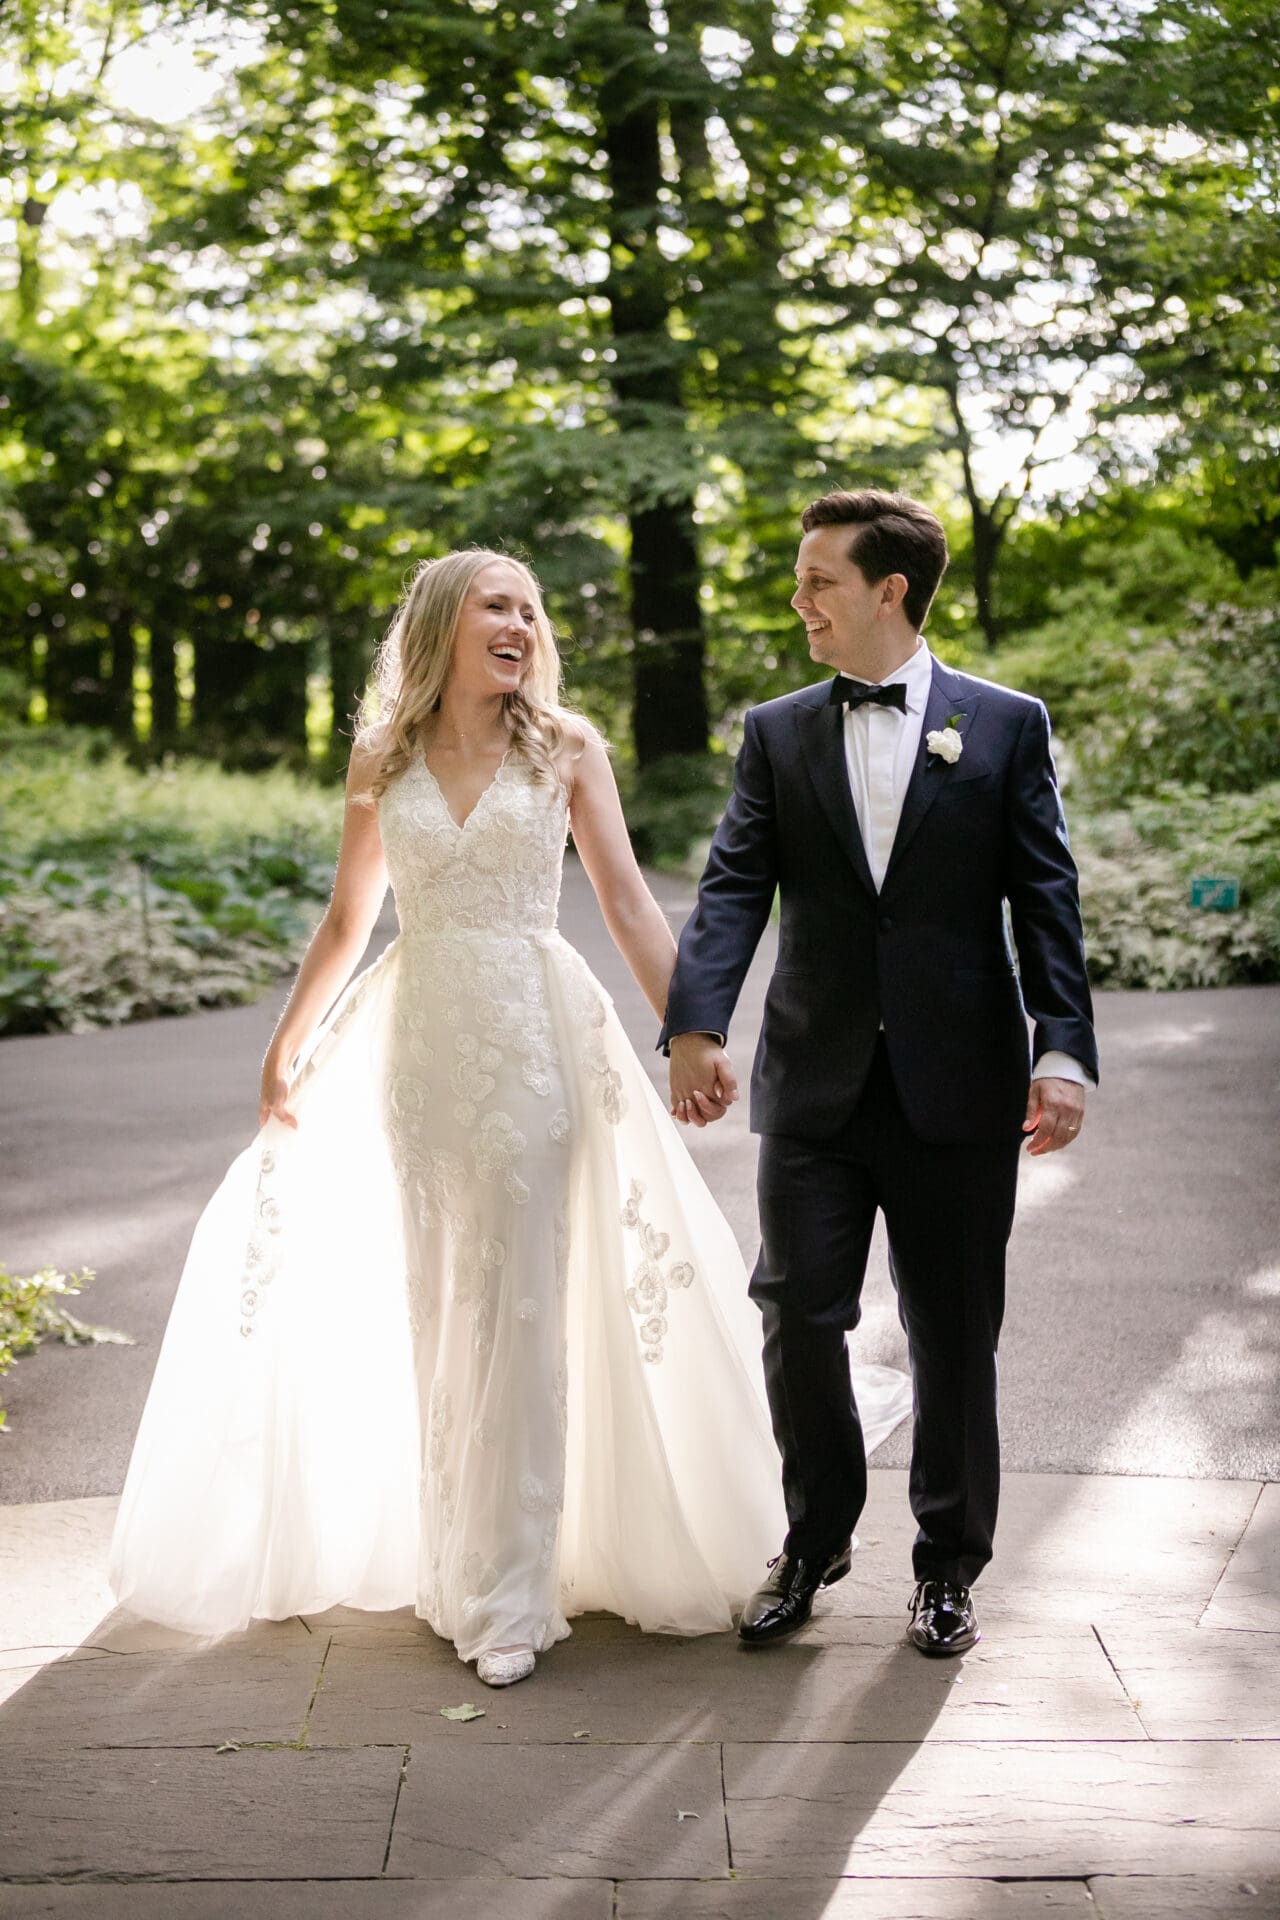 A bride and groom walking and laughing during their portrait session at the New York Botanical Garden in NY